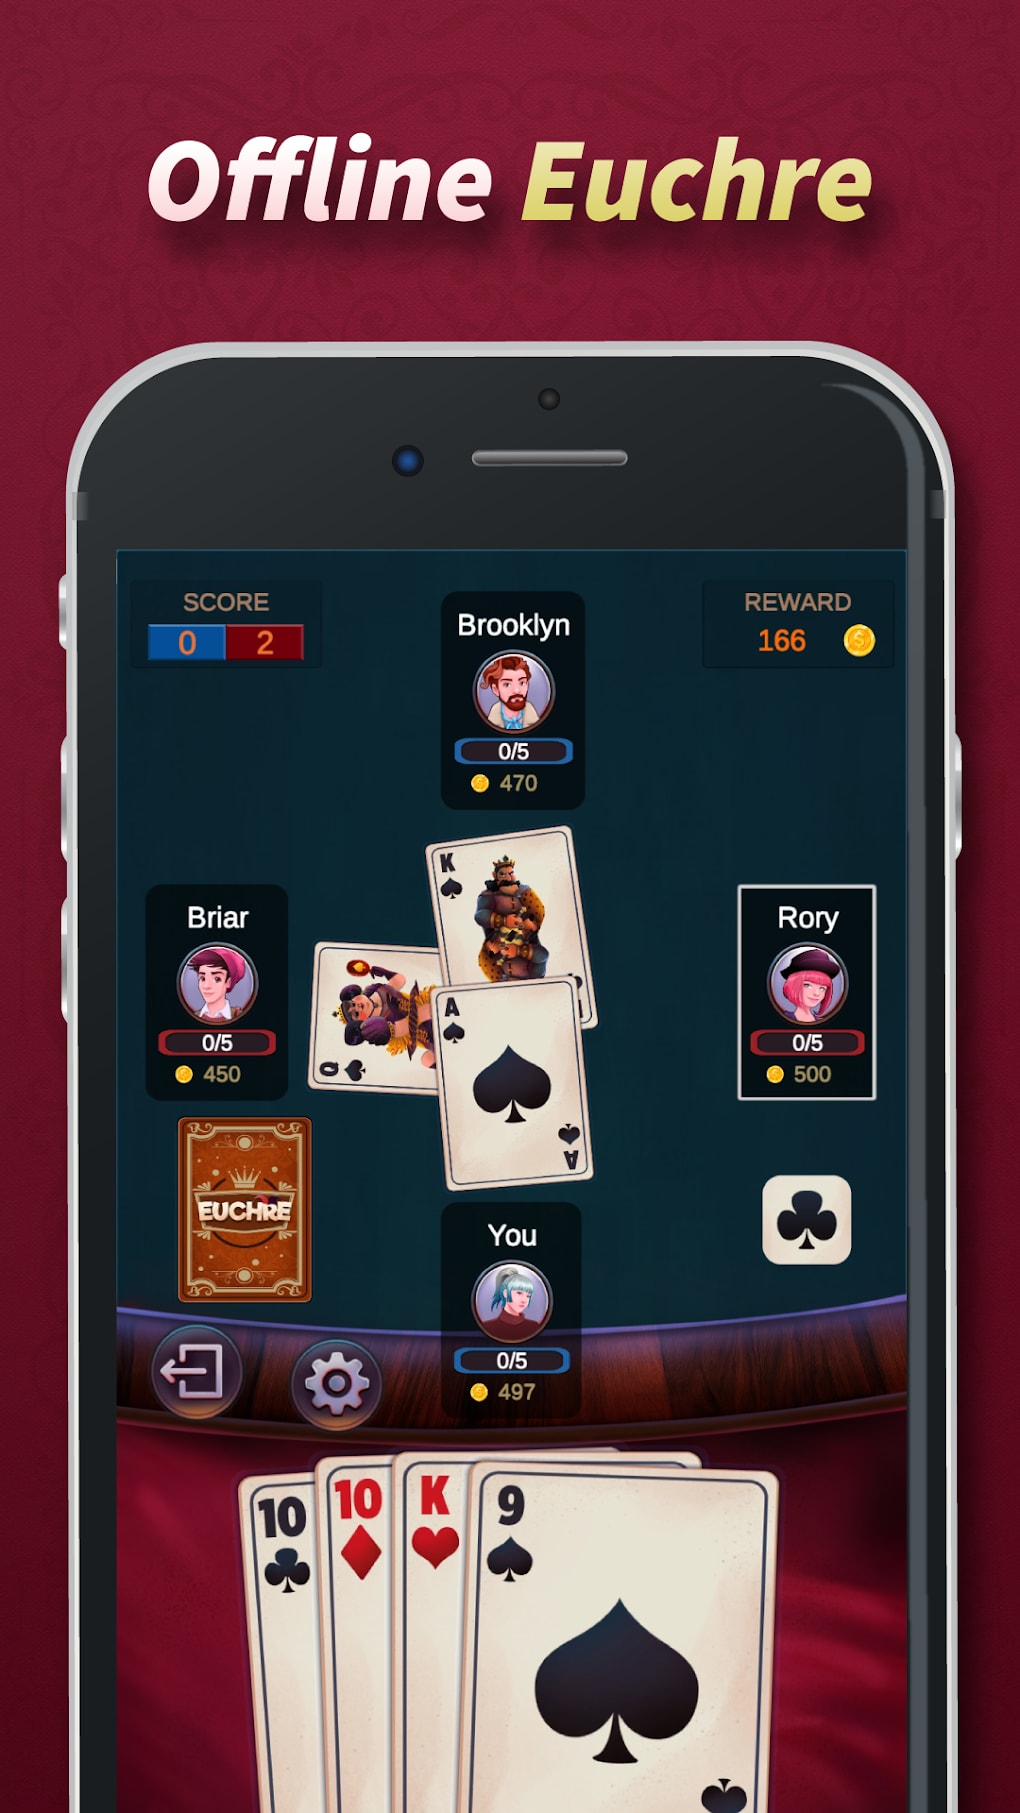 Buraco Jogatina: Play for free on your smartphone and tablet